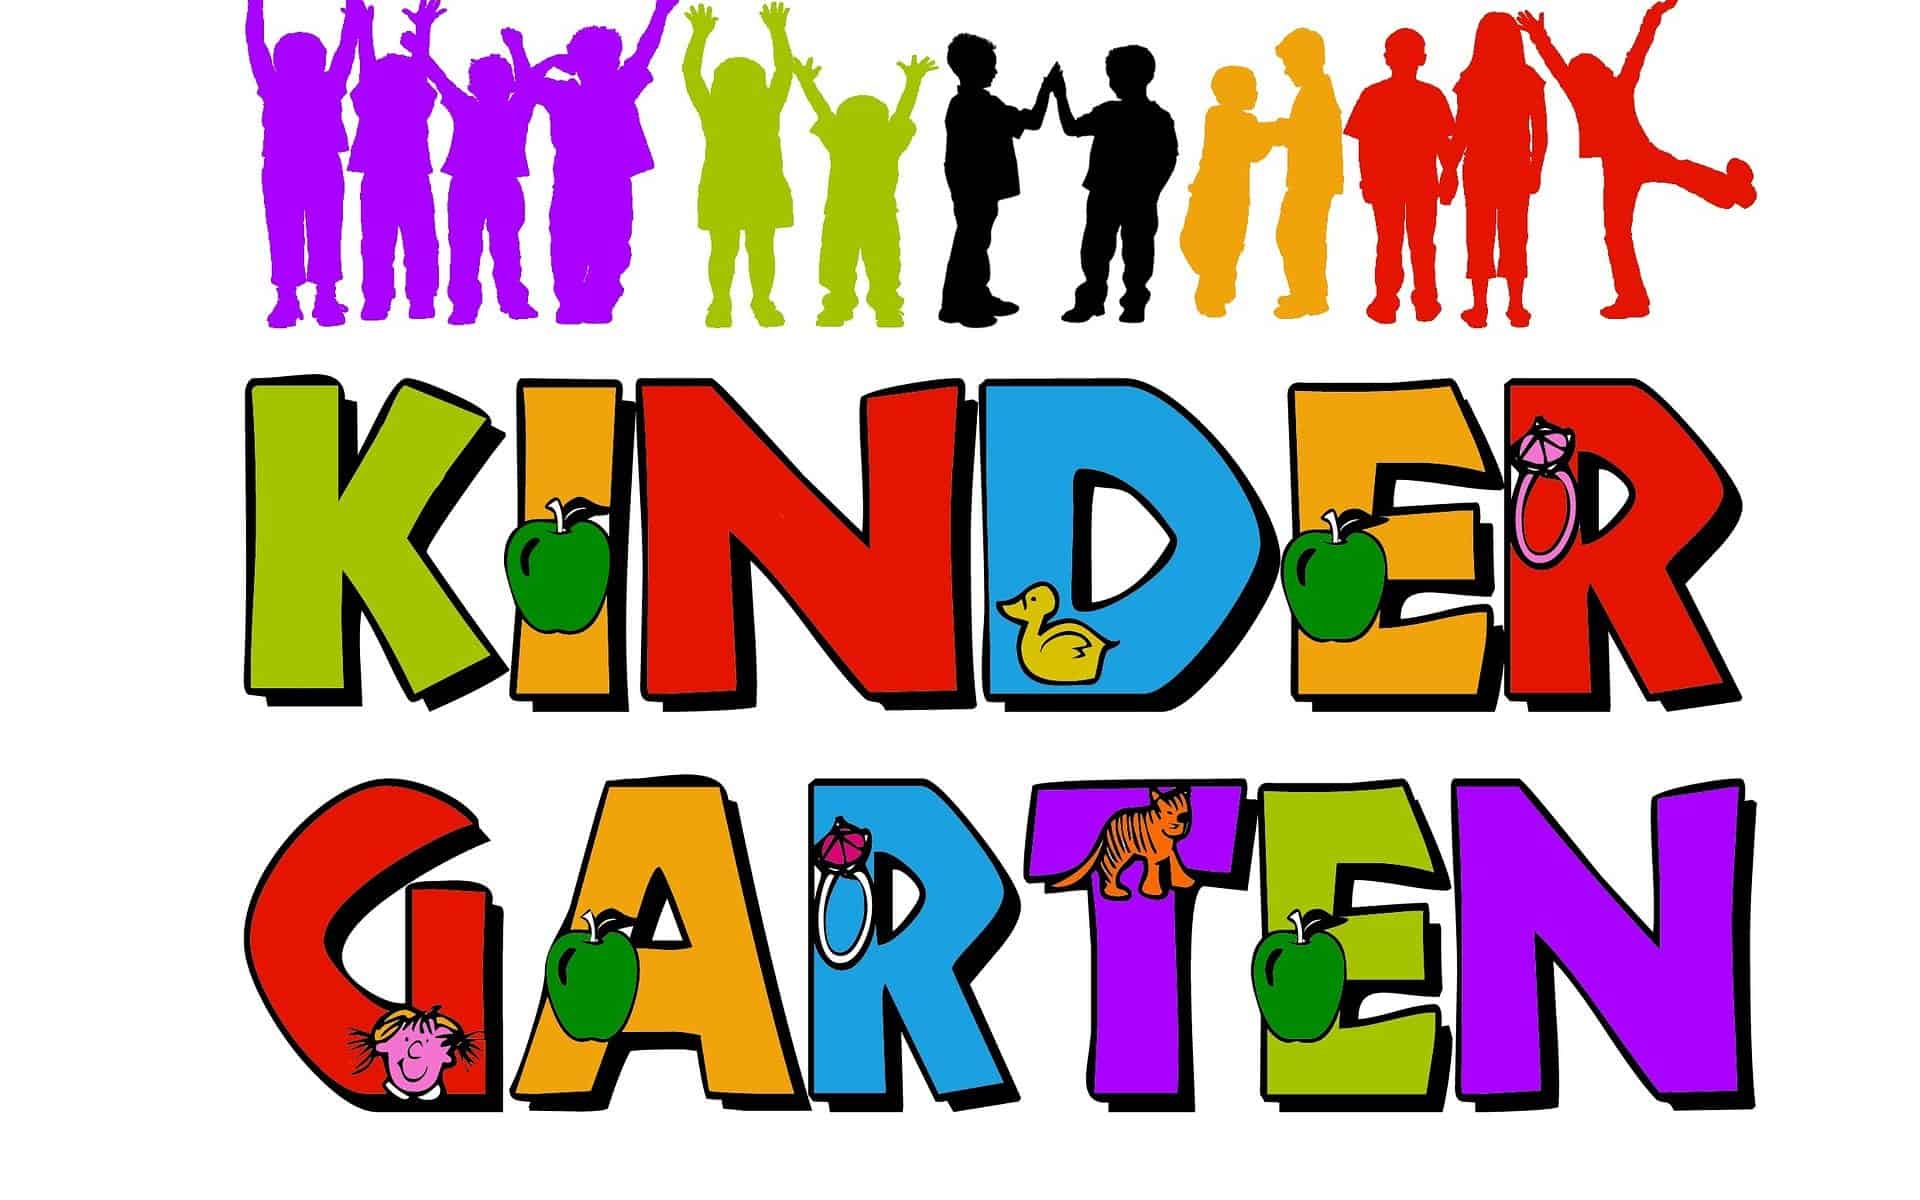 colorful kids silhouettes and the word "Kindergarten" in colorful capital letters